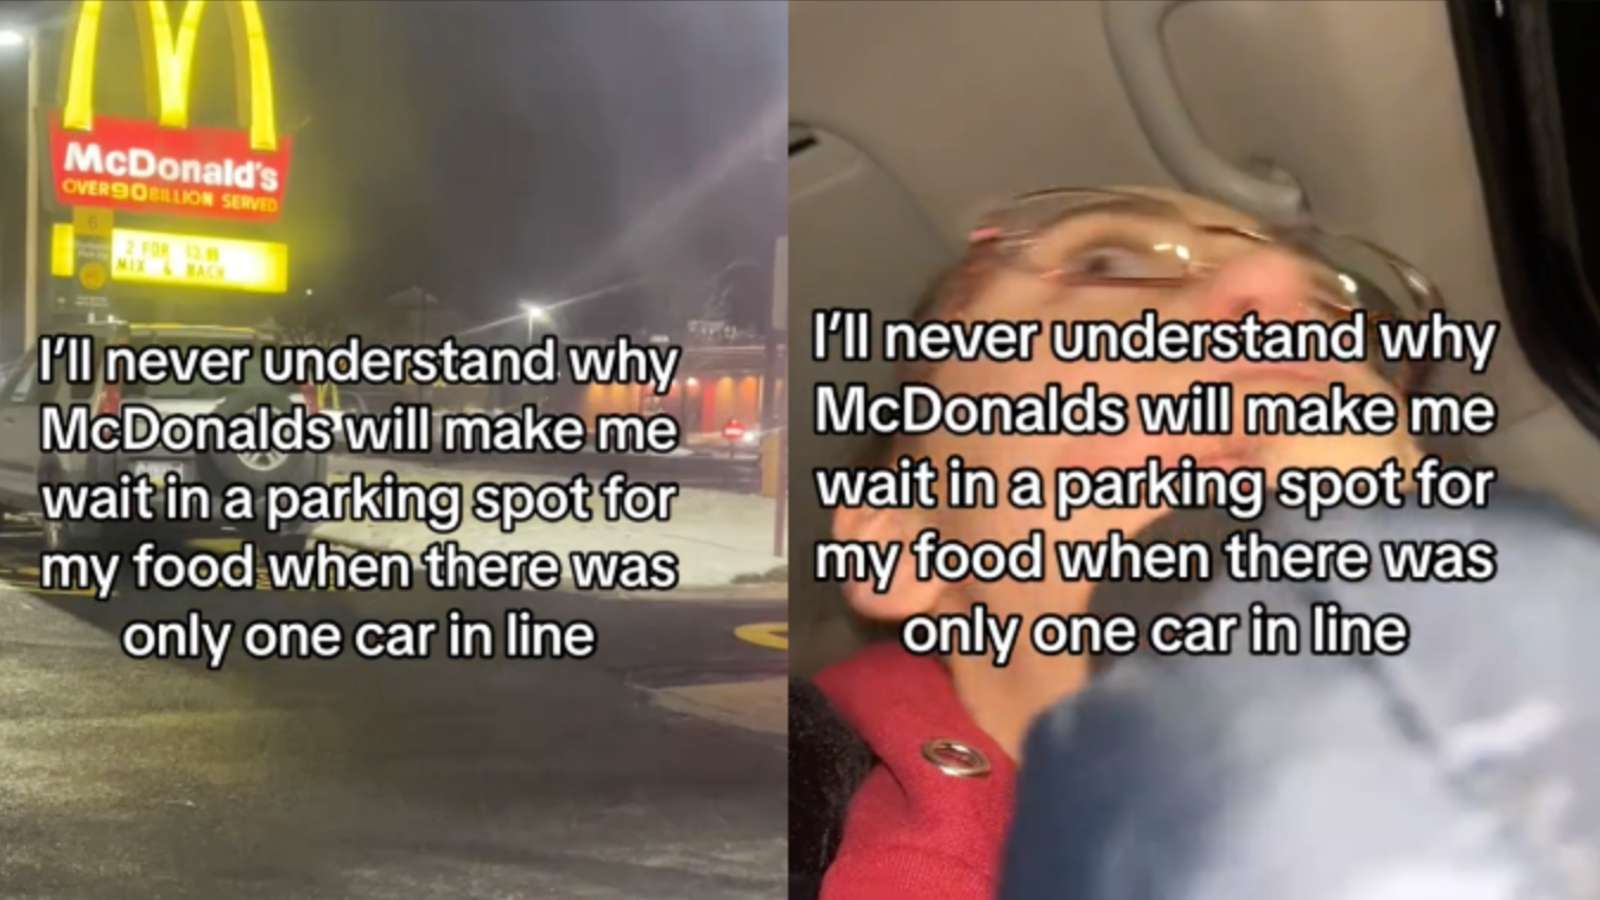 McDonald's customer made to wait in parking lot